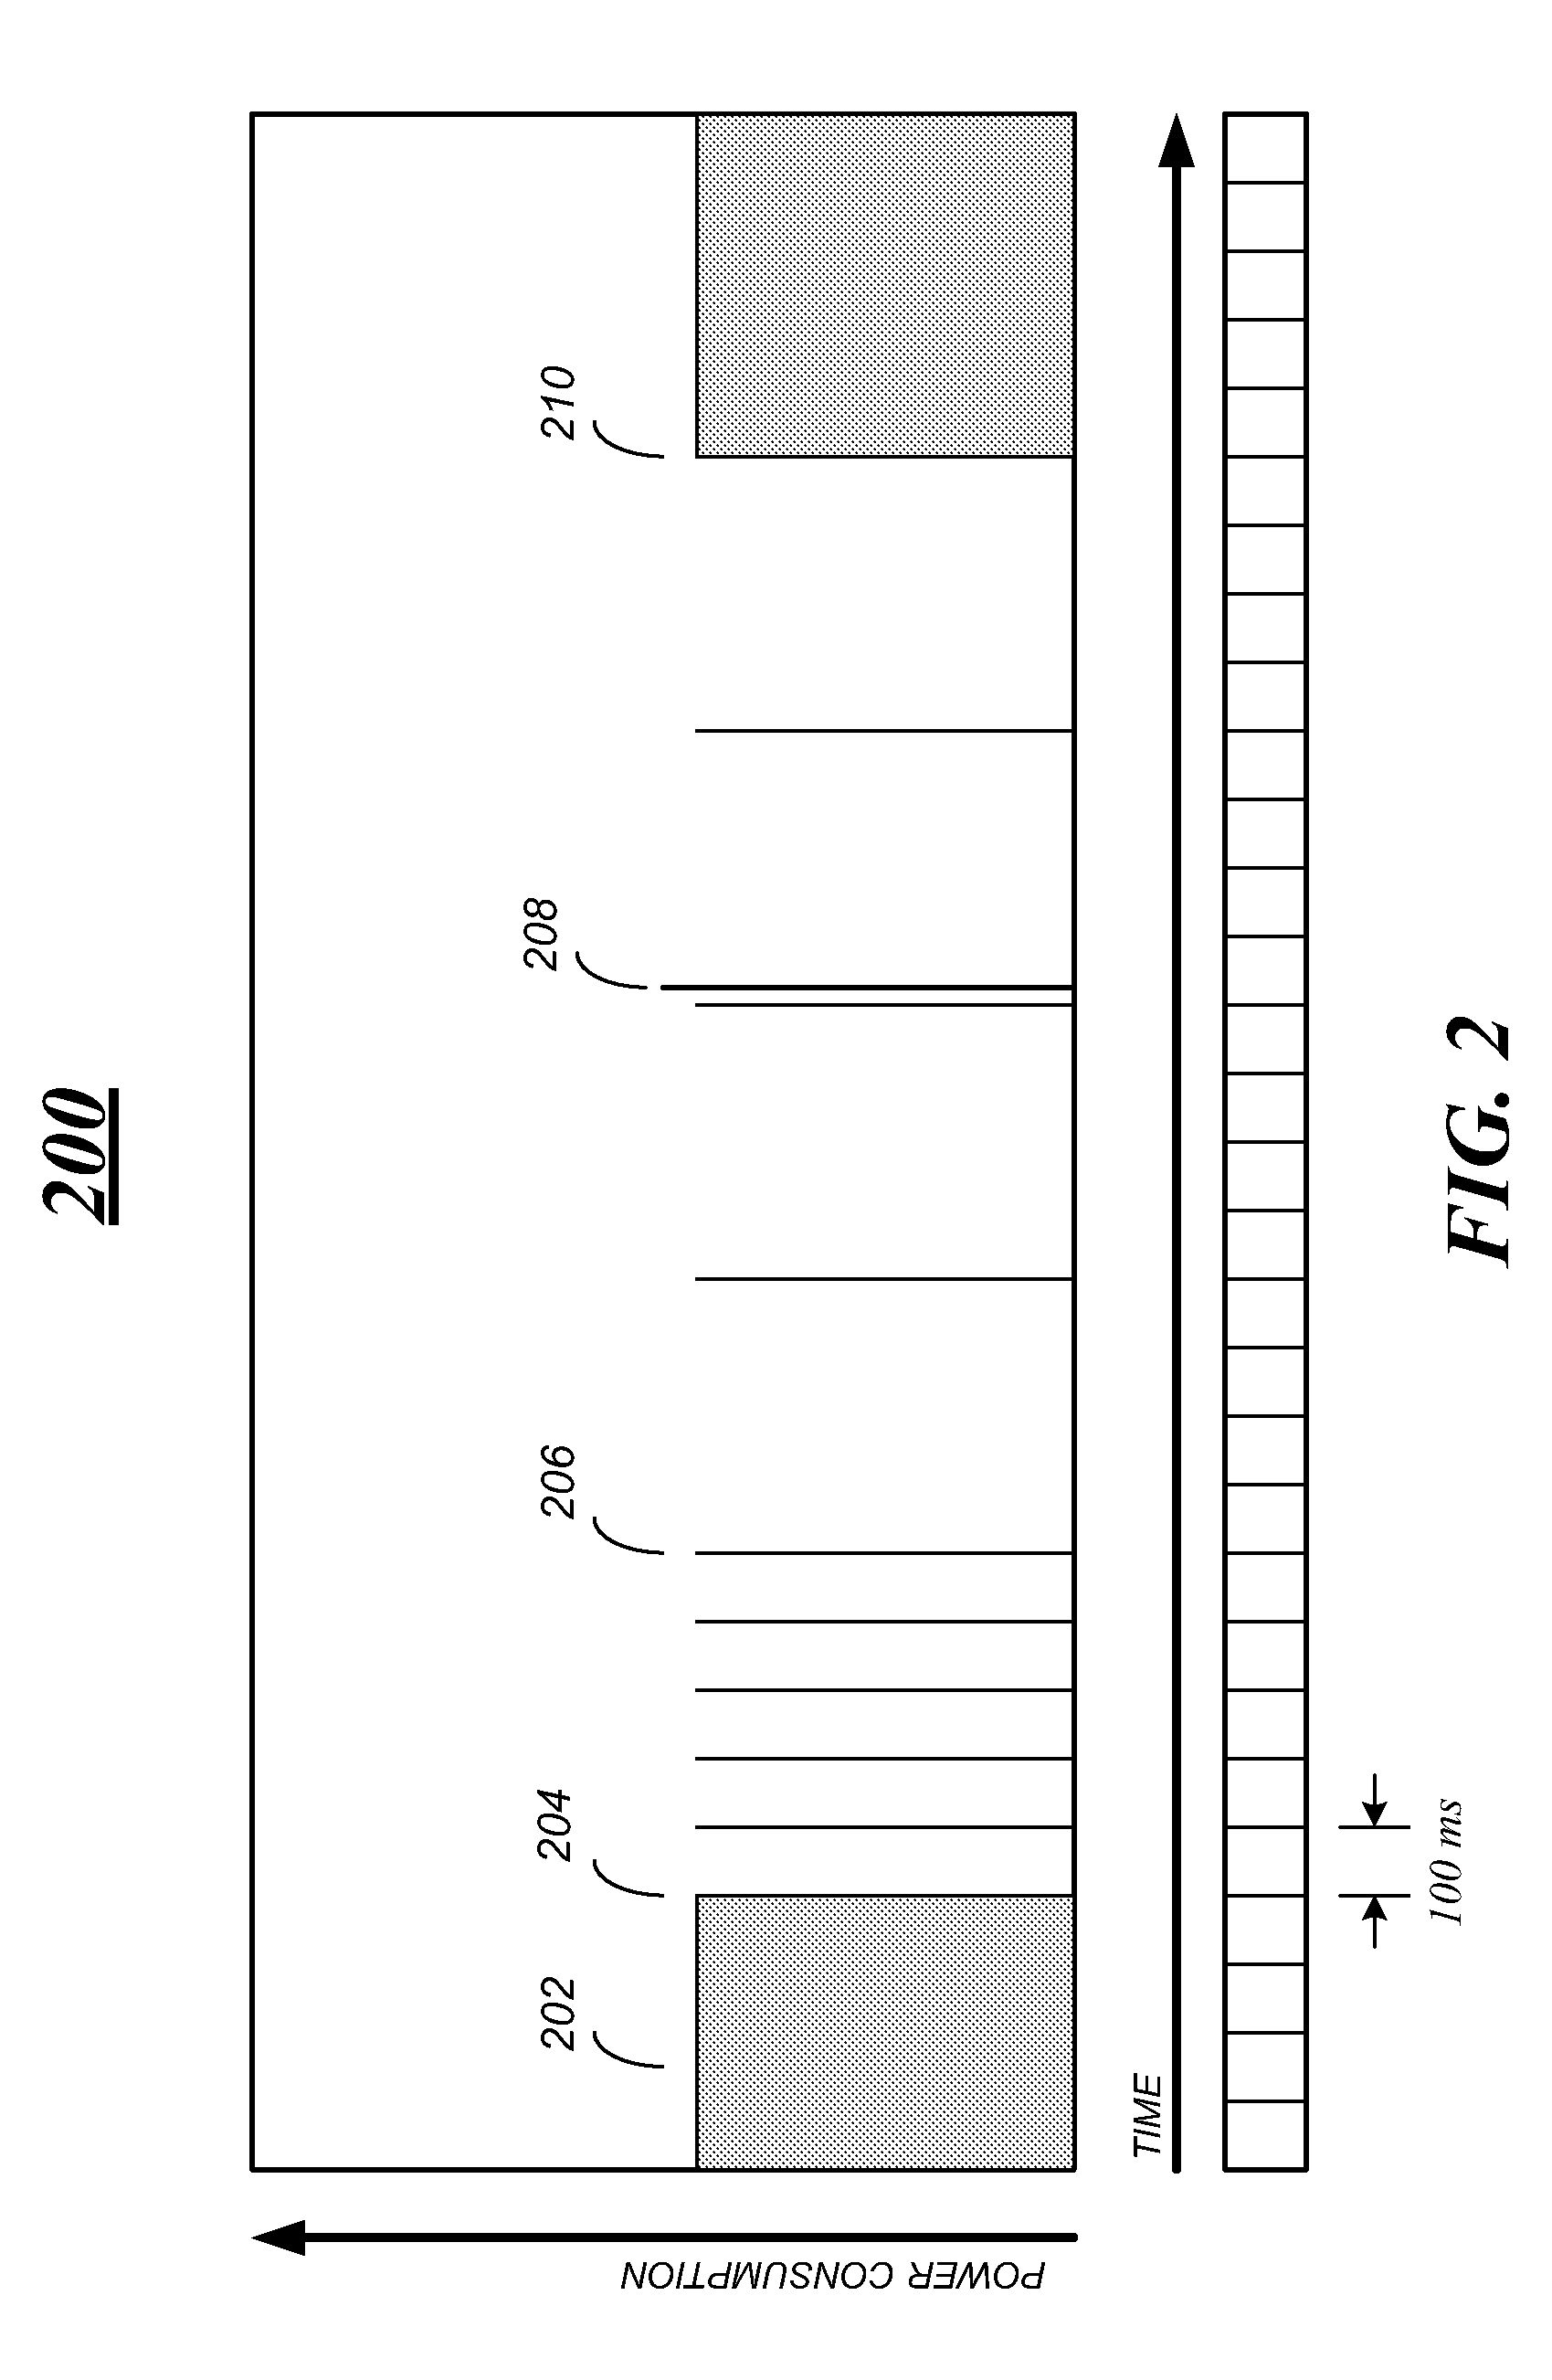 Method and apparatus for adaptive power saving in a mobile computing device